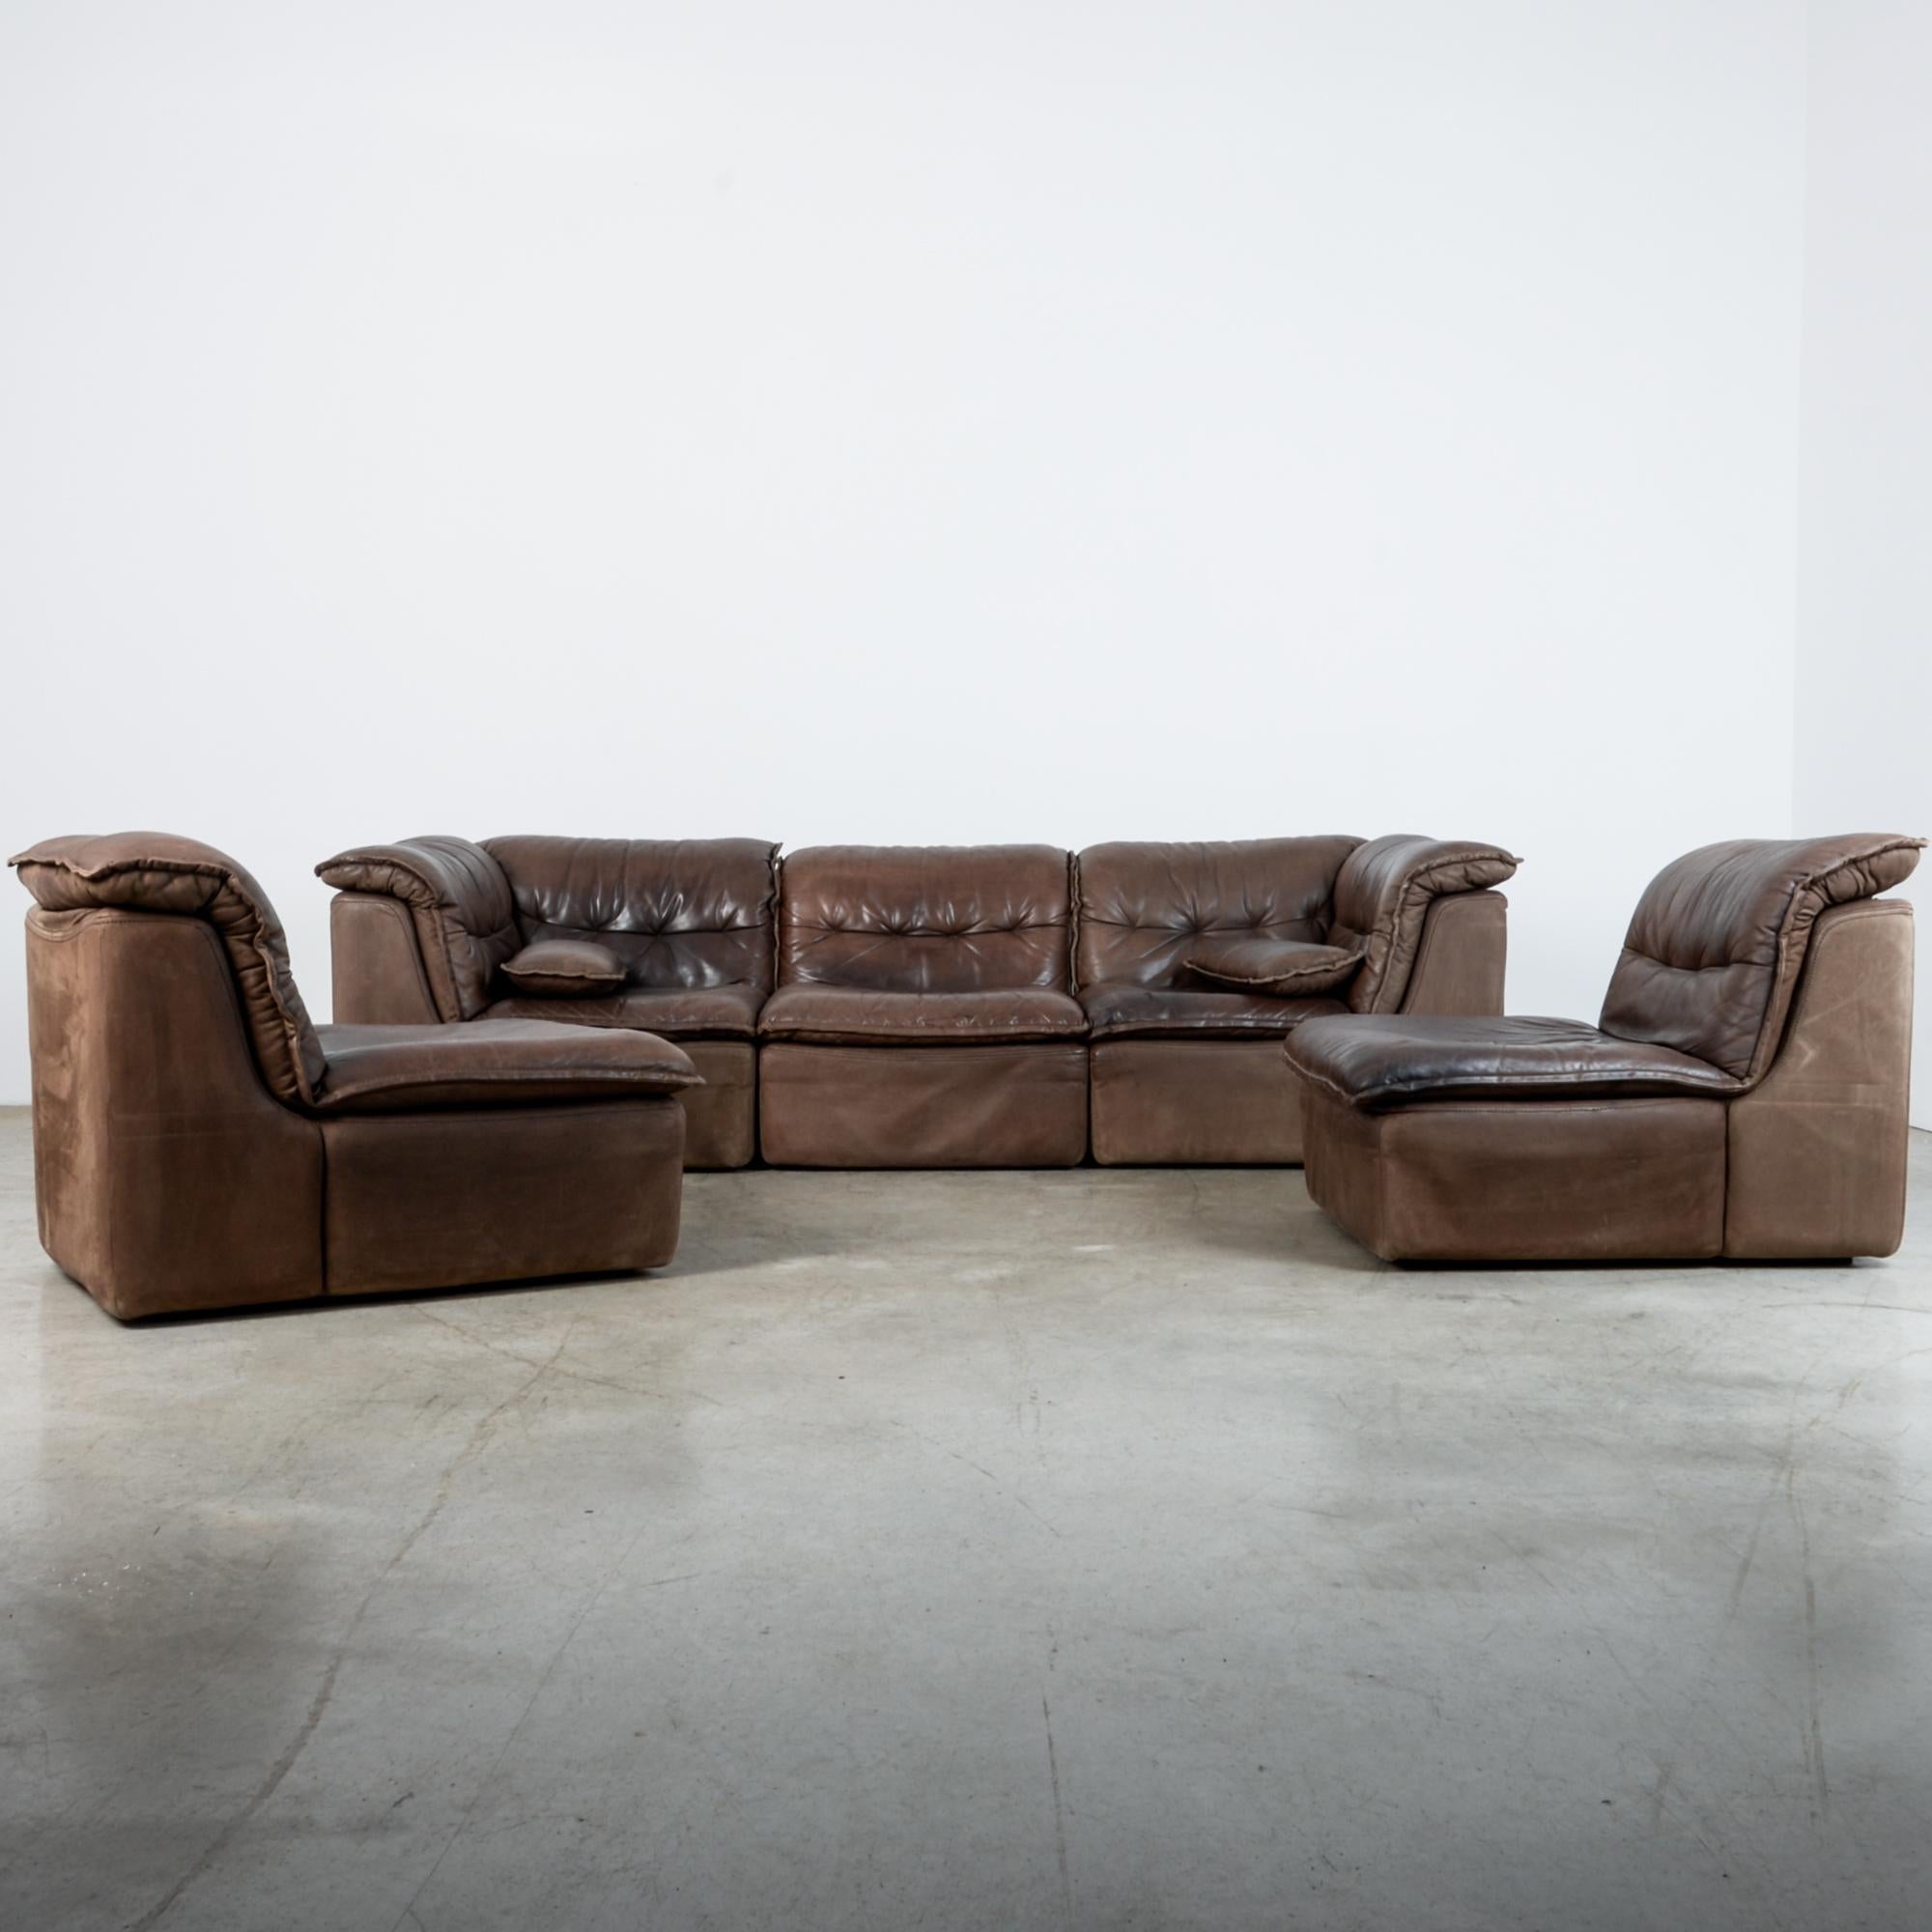 From Germany, circa 1970 this leather sofa set includes two corner units and three standard modules. Simple shape give a sleek impression with a comfortable and natural finish. Great aged patina and upholstery style with thick seam and tufted